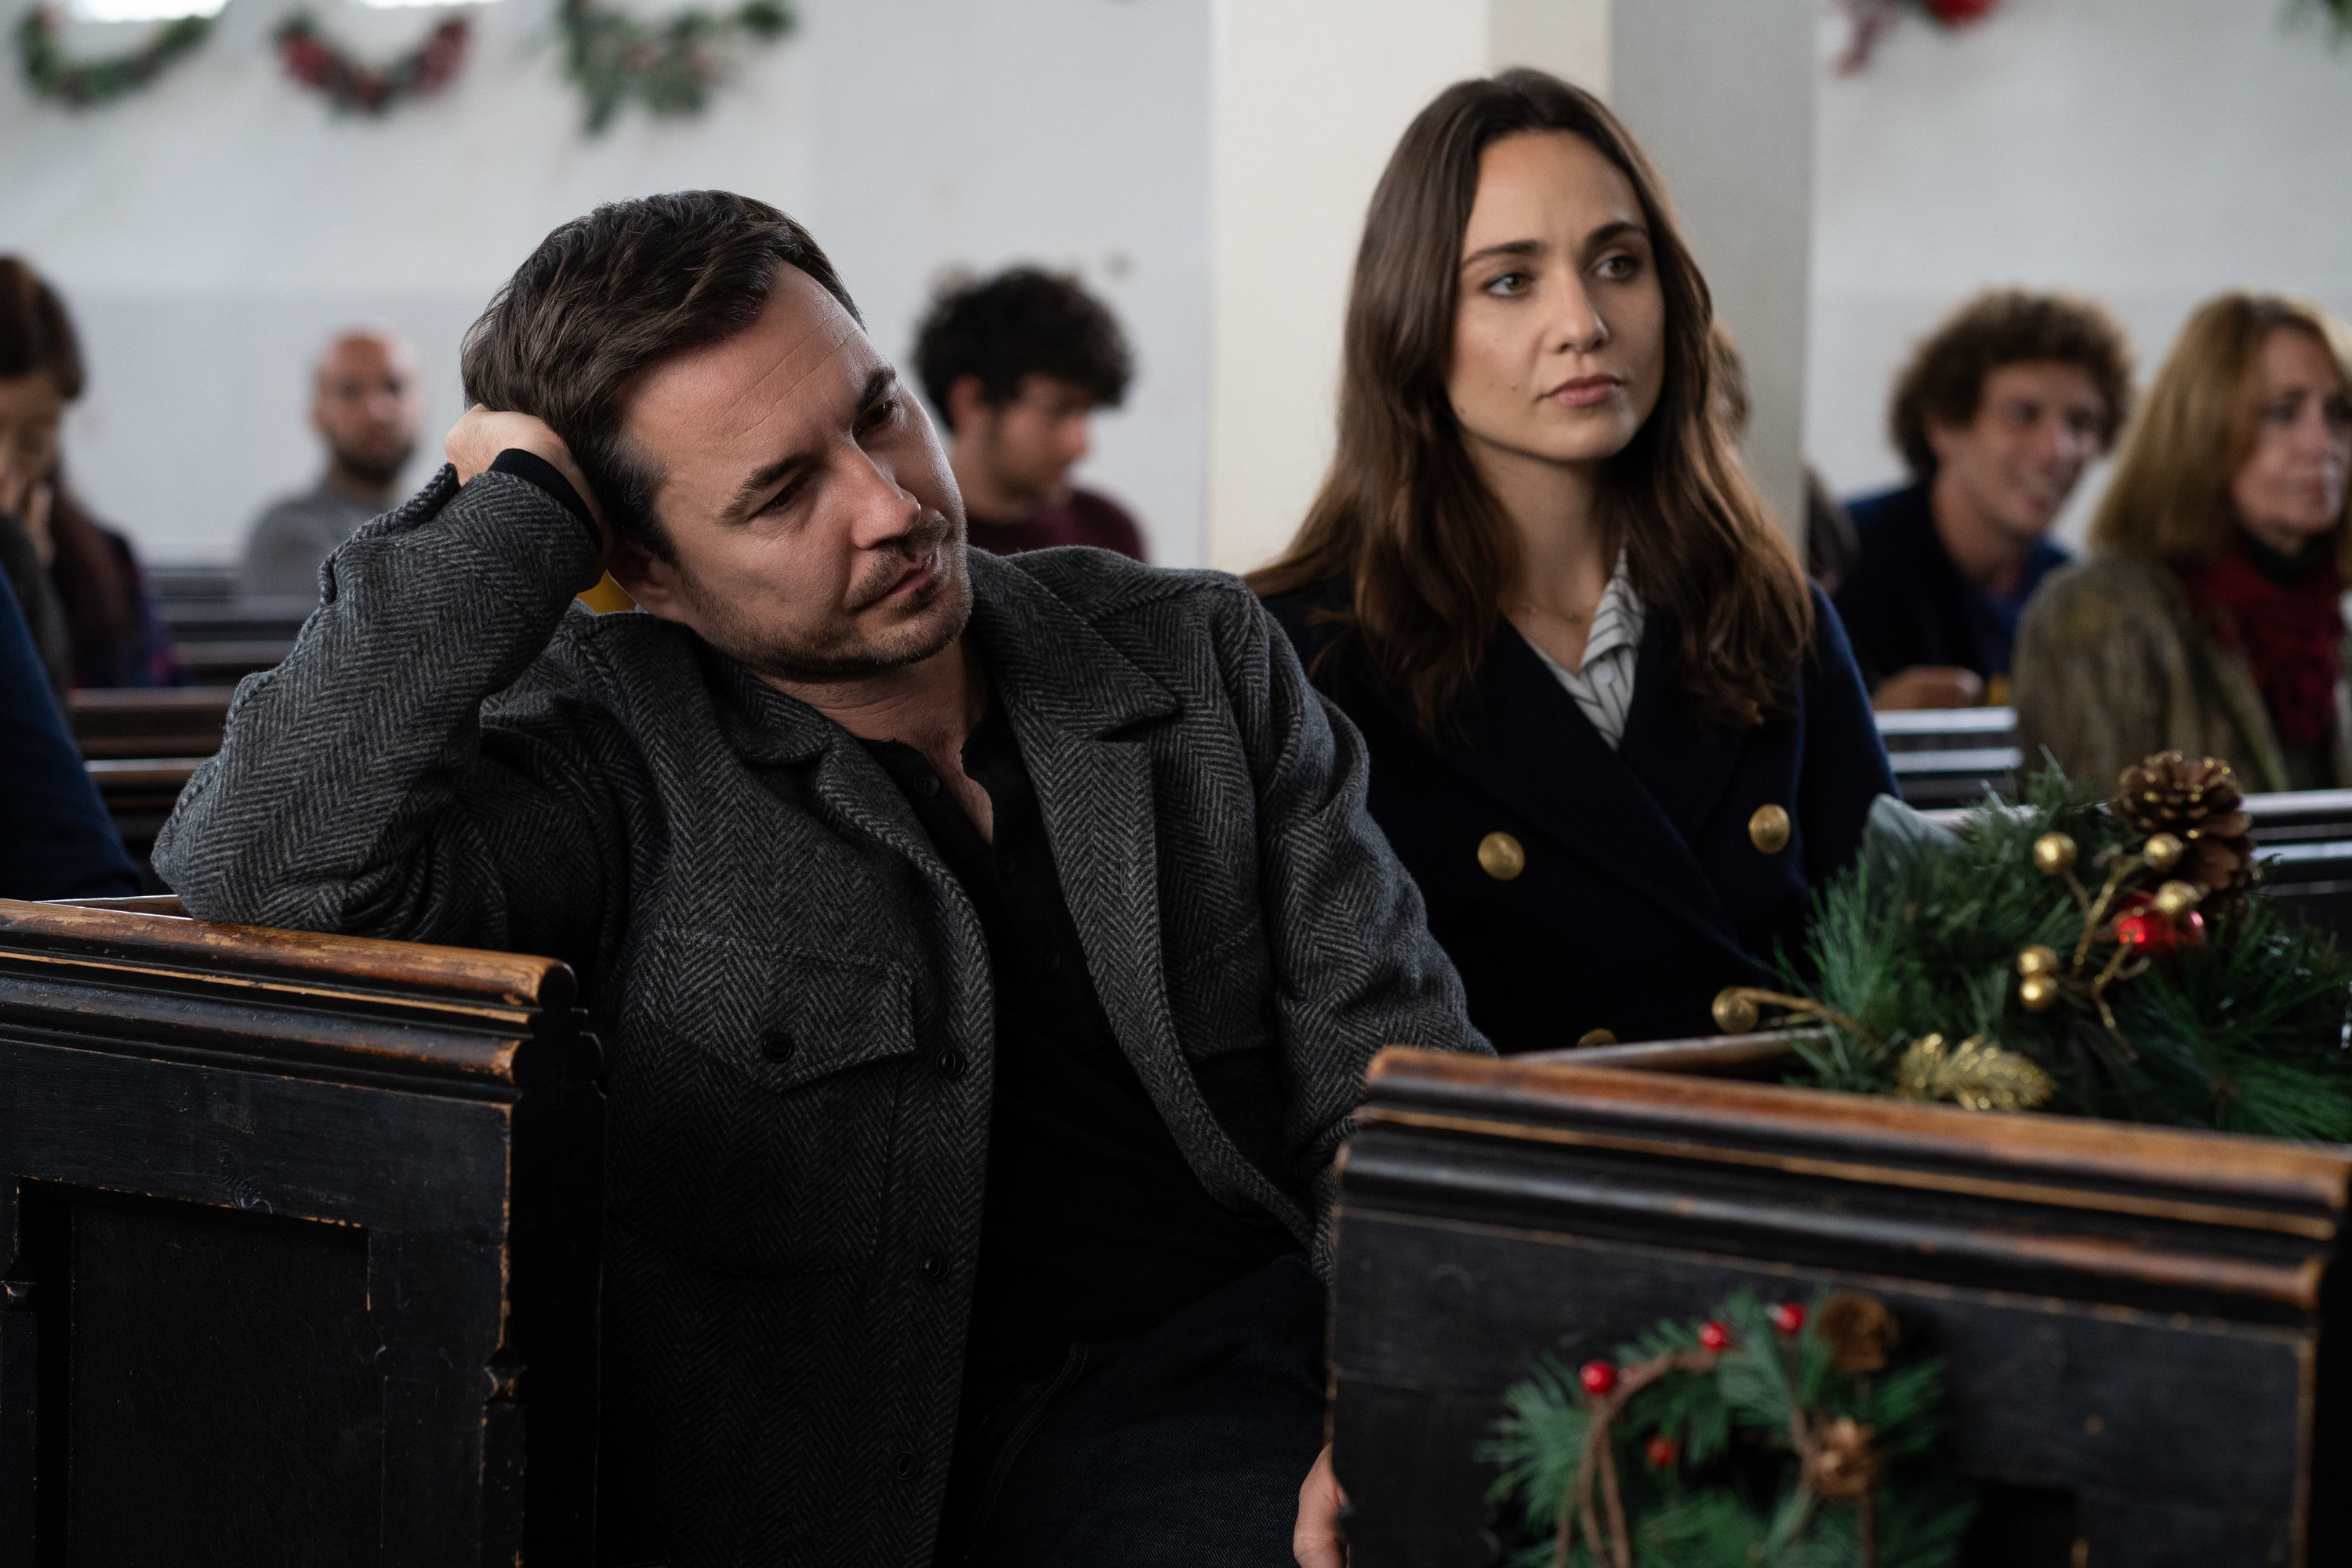 Tuppence Middleton as Fi Lawson sitting next to a tired looking Martin Compston as Bram Lawson in a church